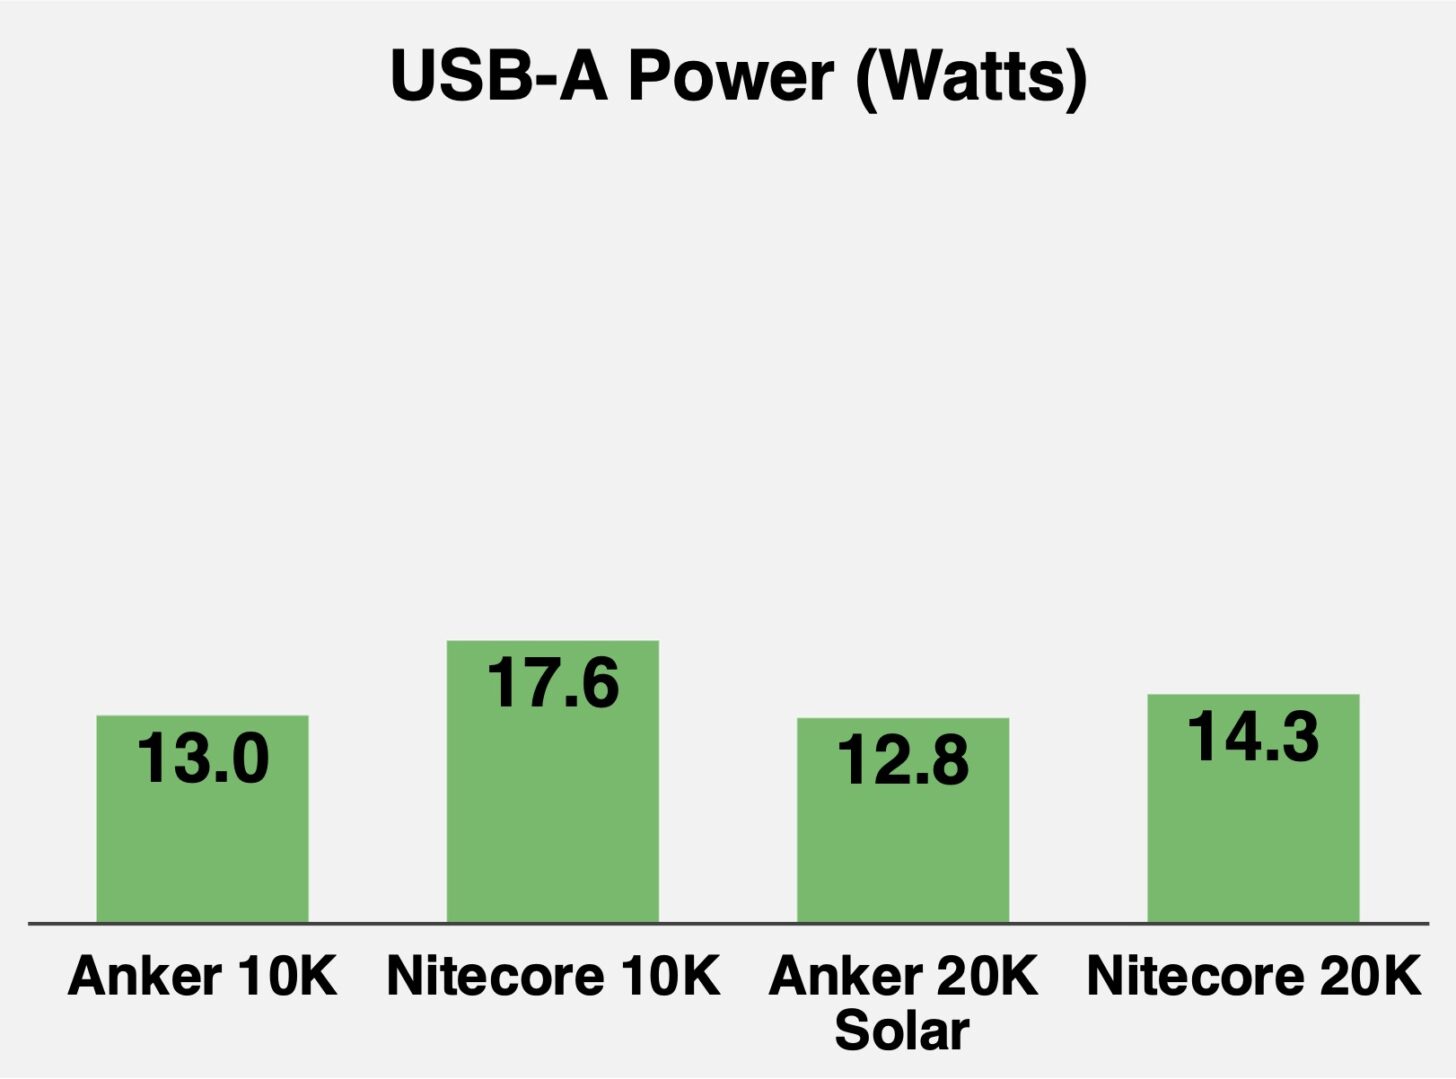 Chart comparing USB-A power delivered in watts. Higher numbers are better.